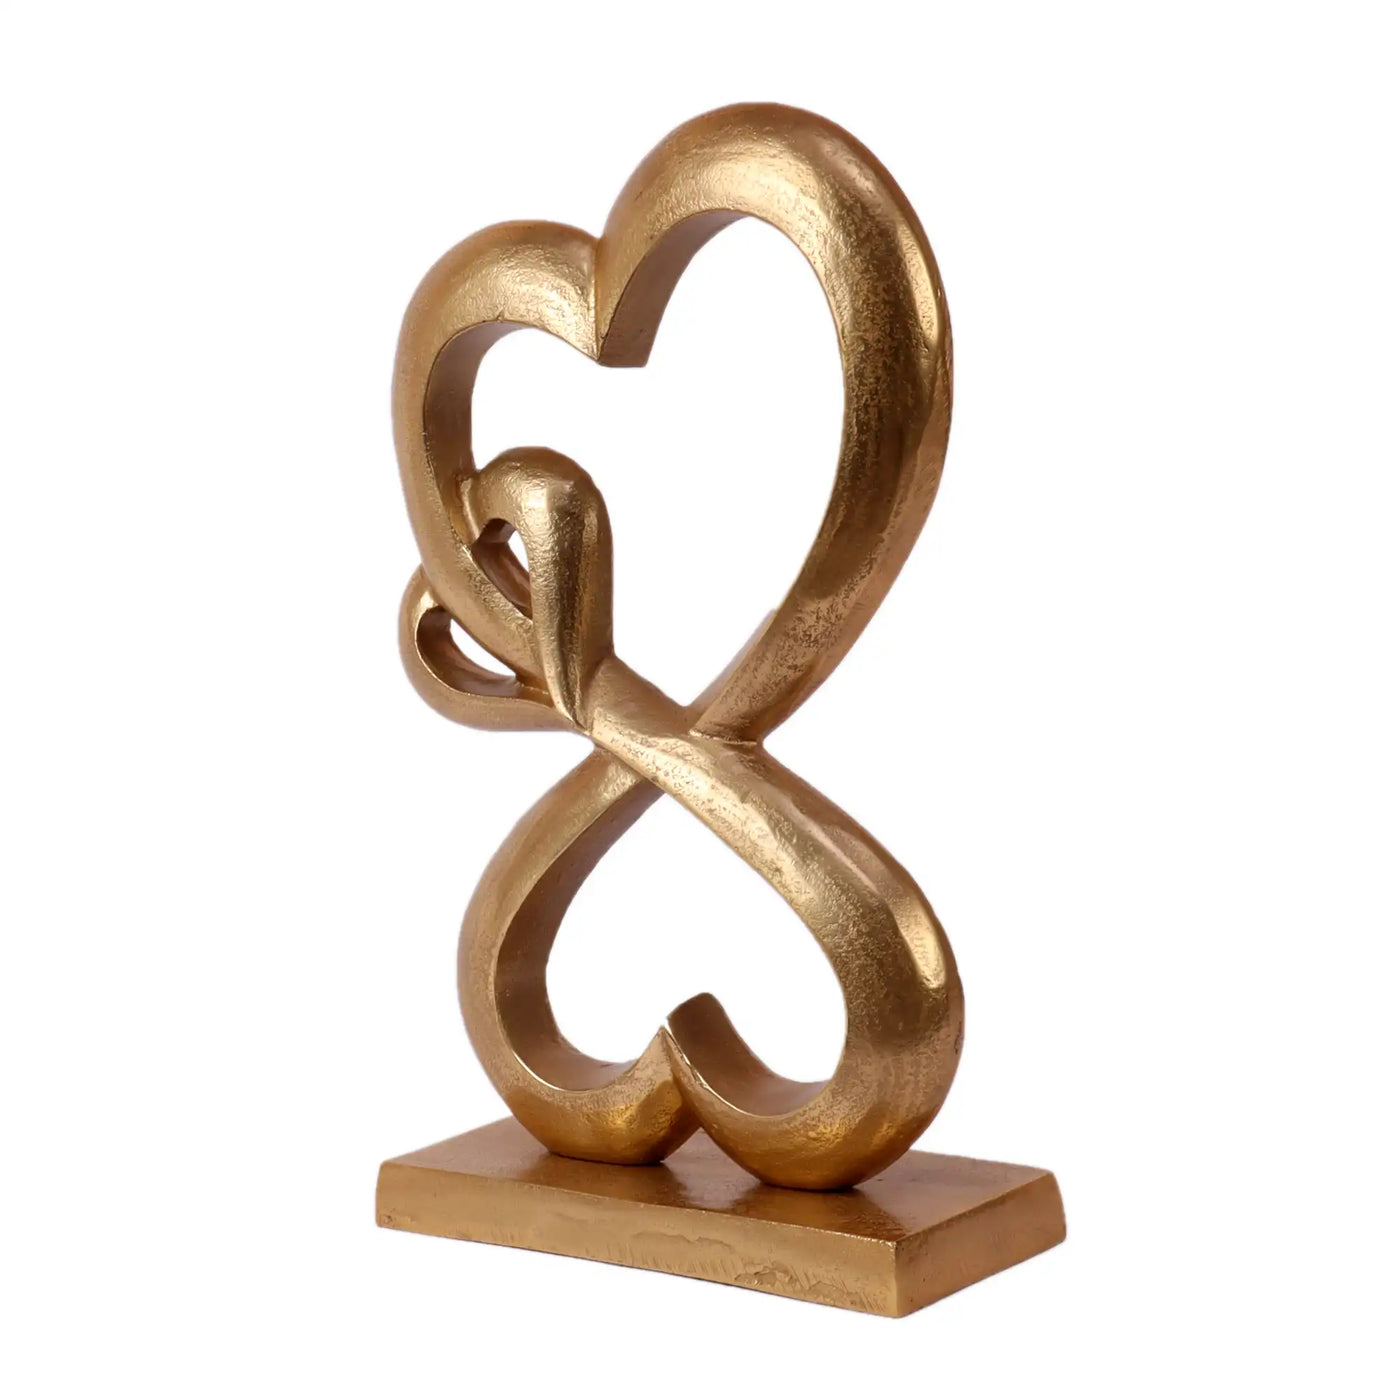 Family Heart Gold Sculpture Large 72-688-41-2